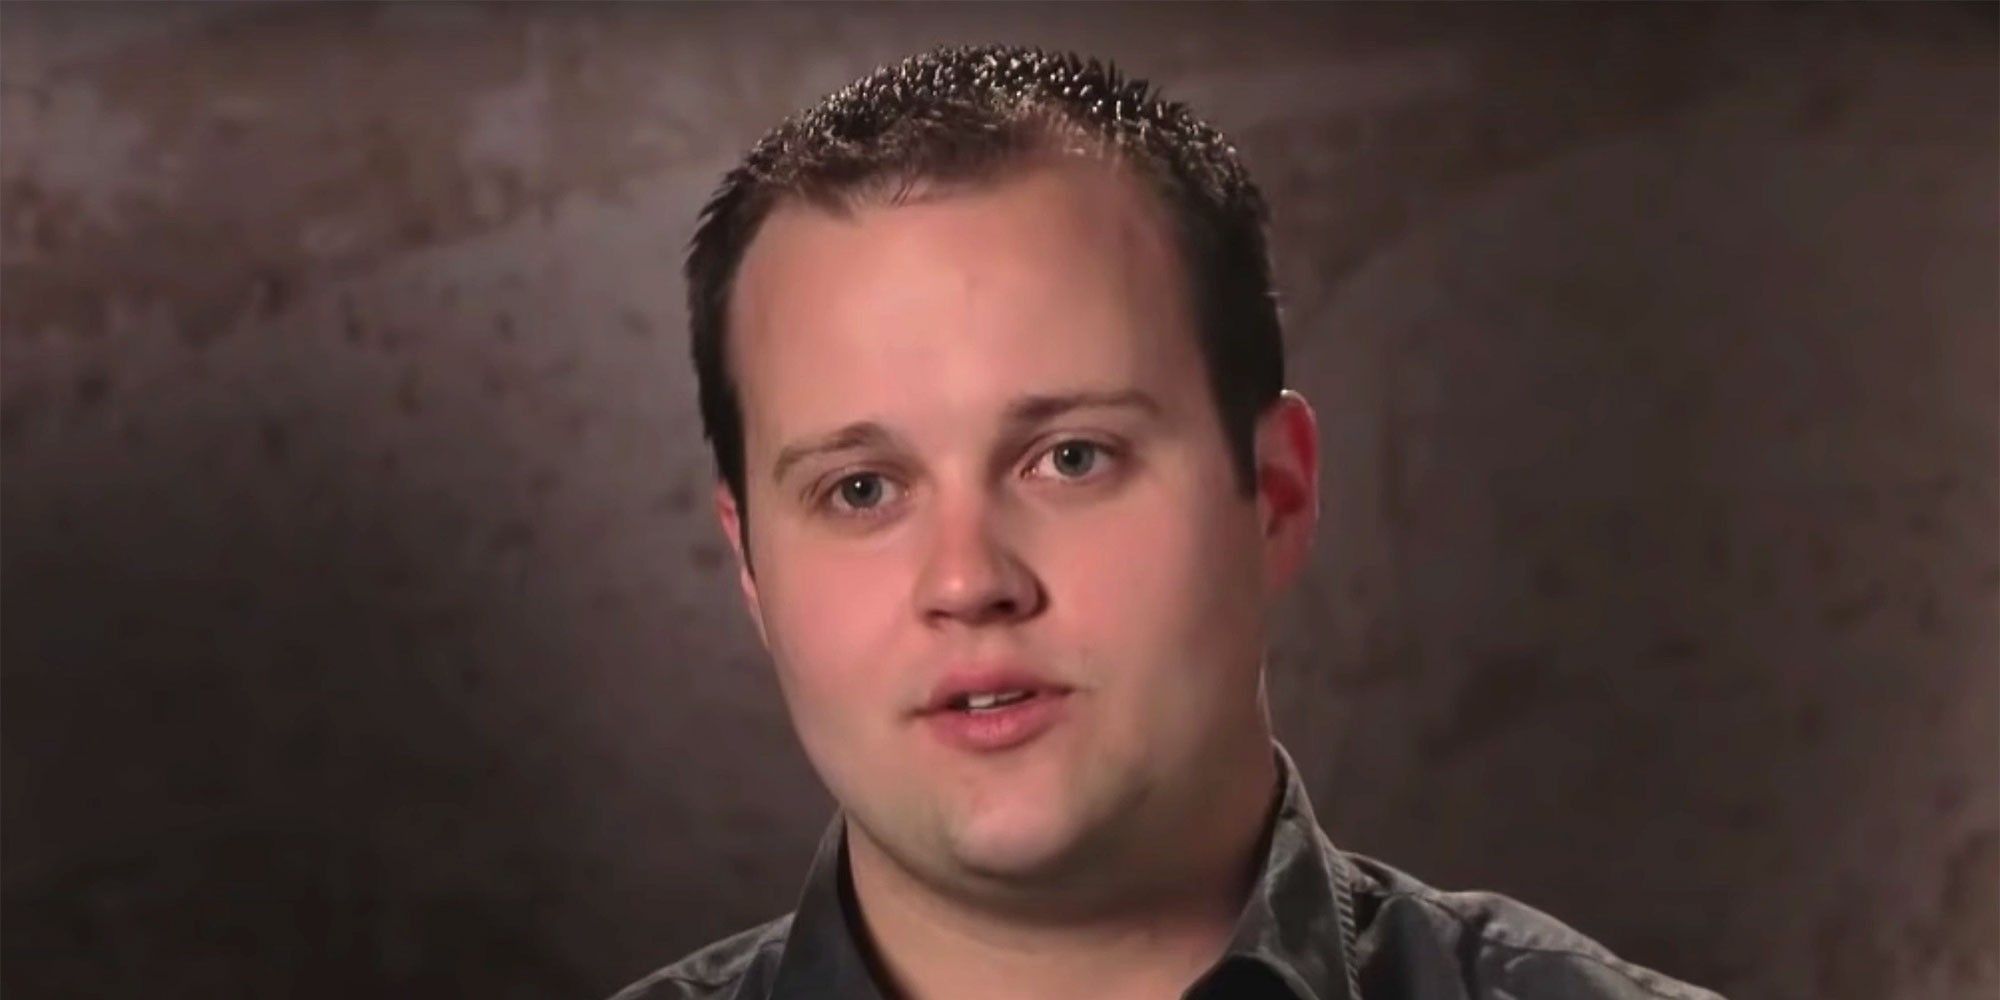 josh duggar 19 kids and counting CROPPED